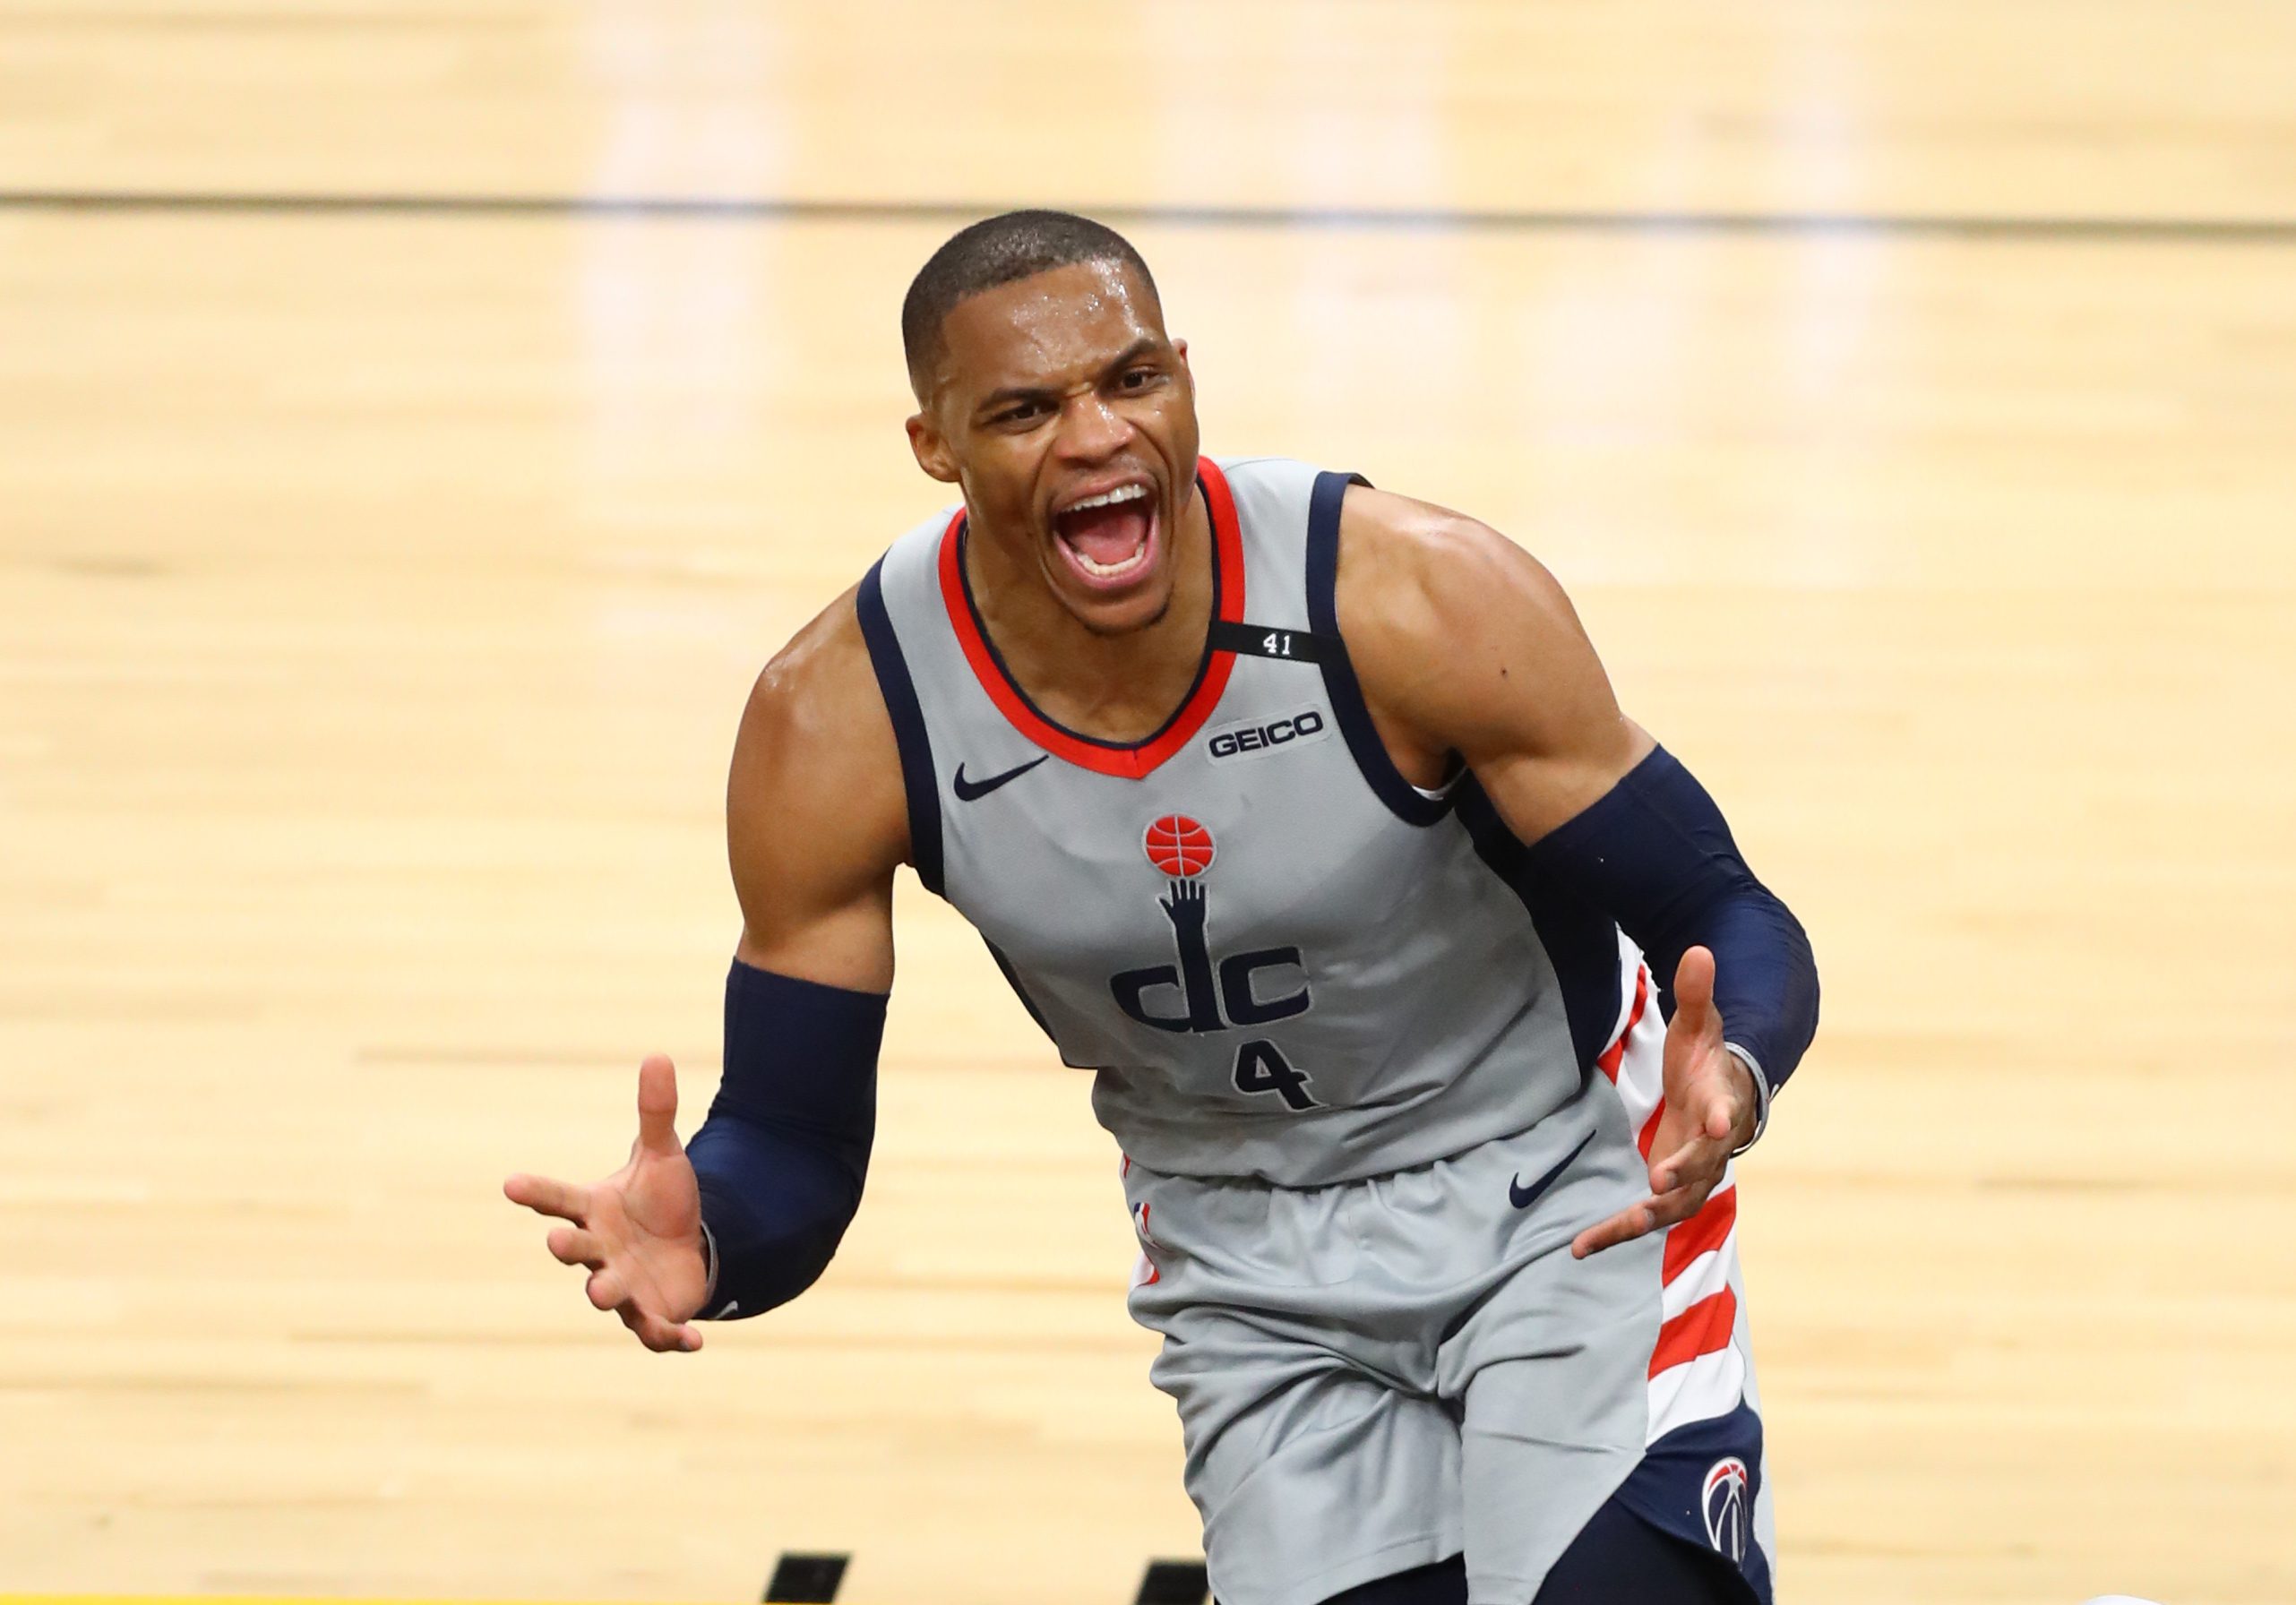 Russell Westbrook clinches 4th career triple-double season